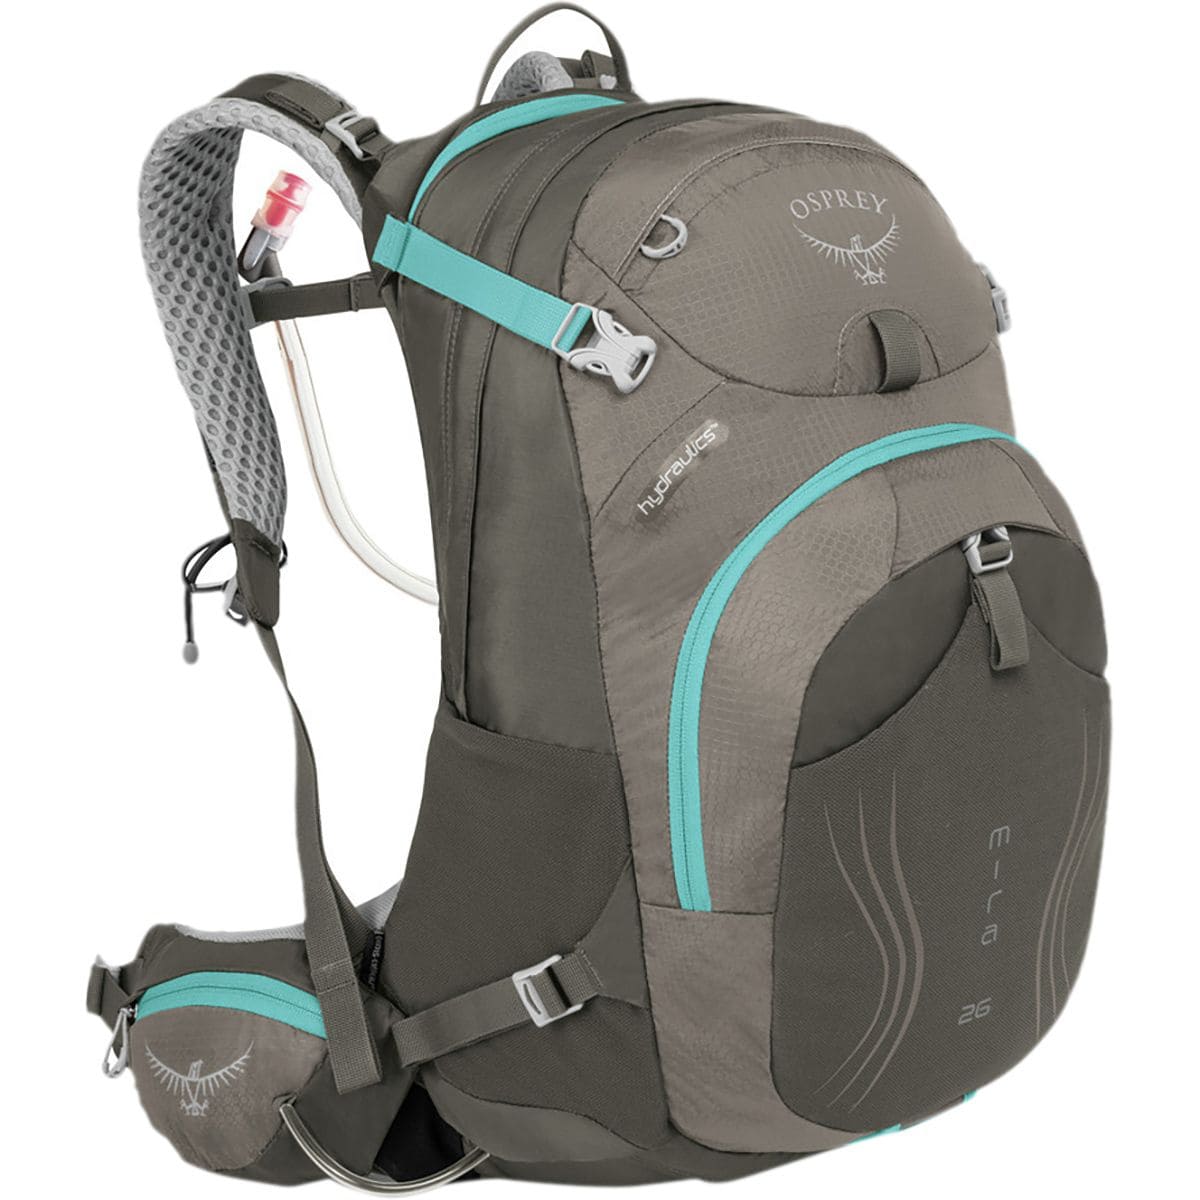 Osprey Packs Mira AG 26 Hydration Pack Womens 1465 1587cu in